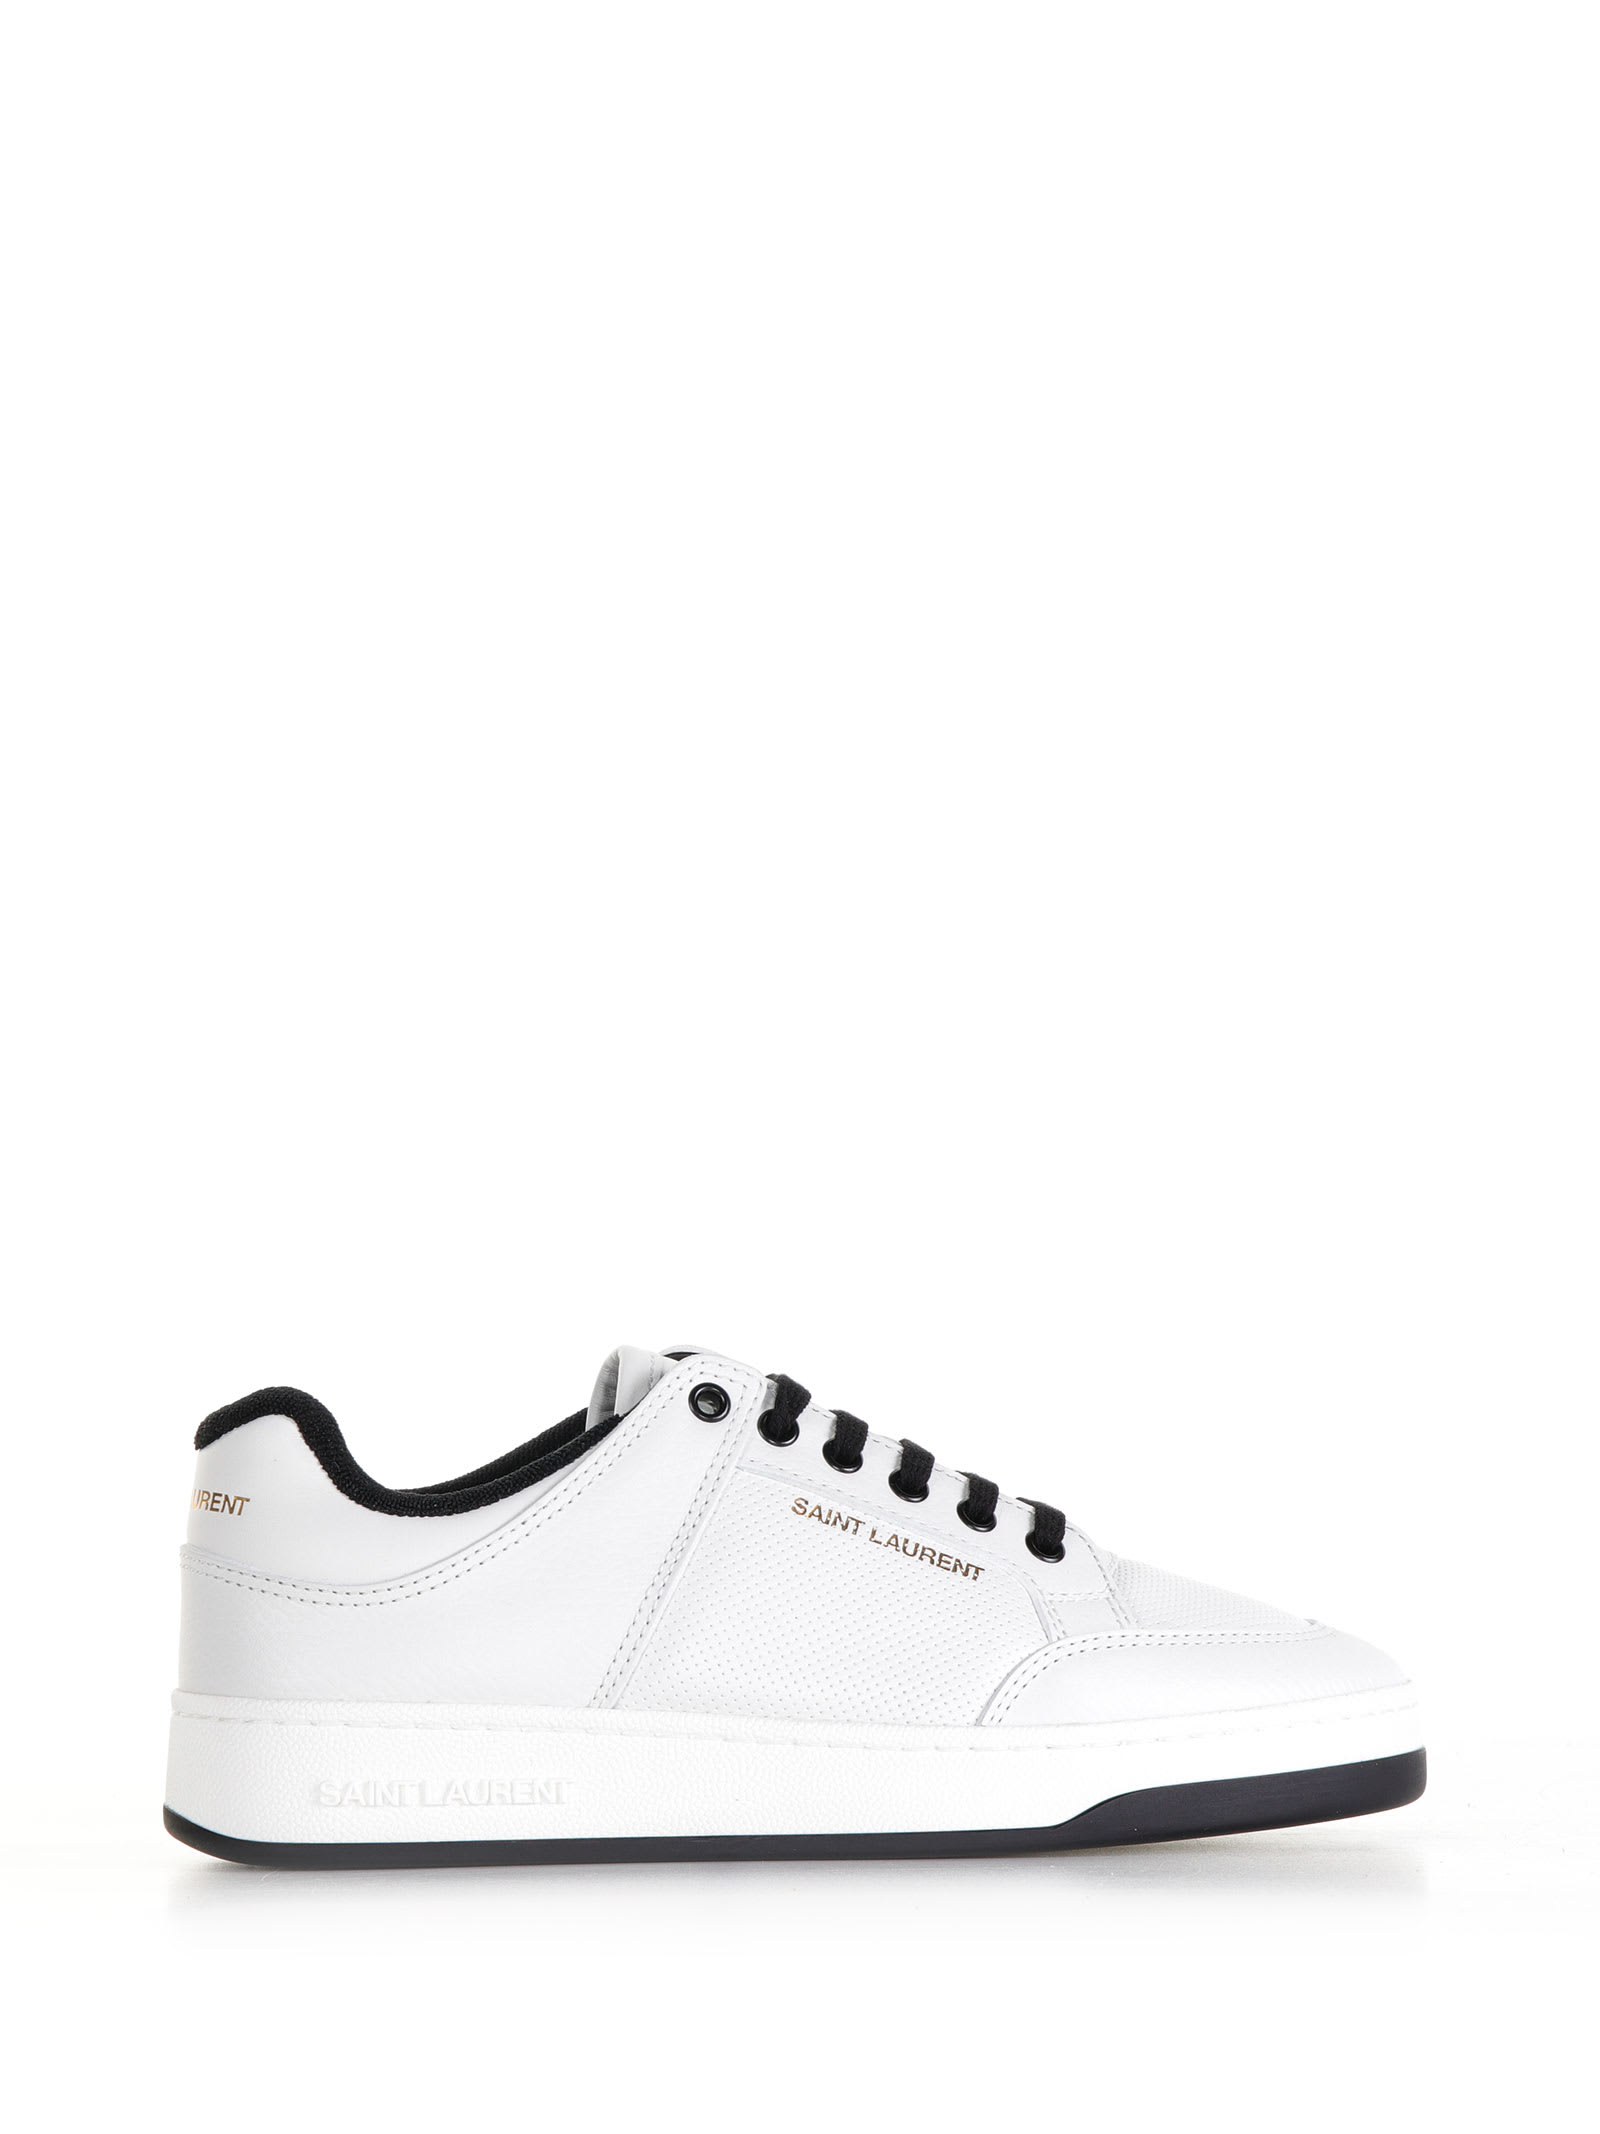 SAINT LAURENT LOW-TOP LACE-UP SNEAKERS WITH LOGO